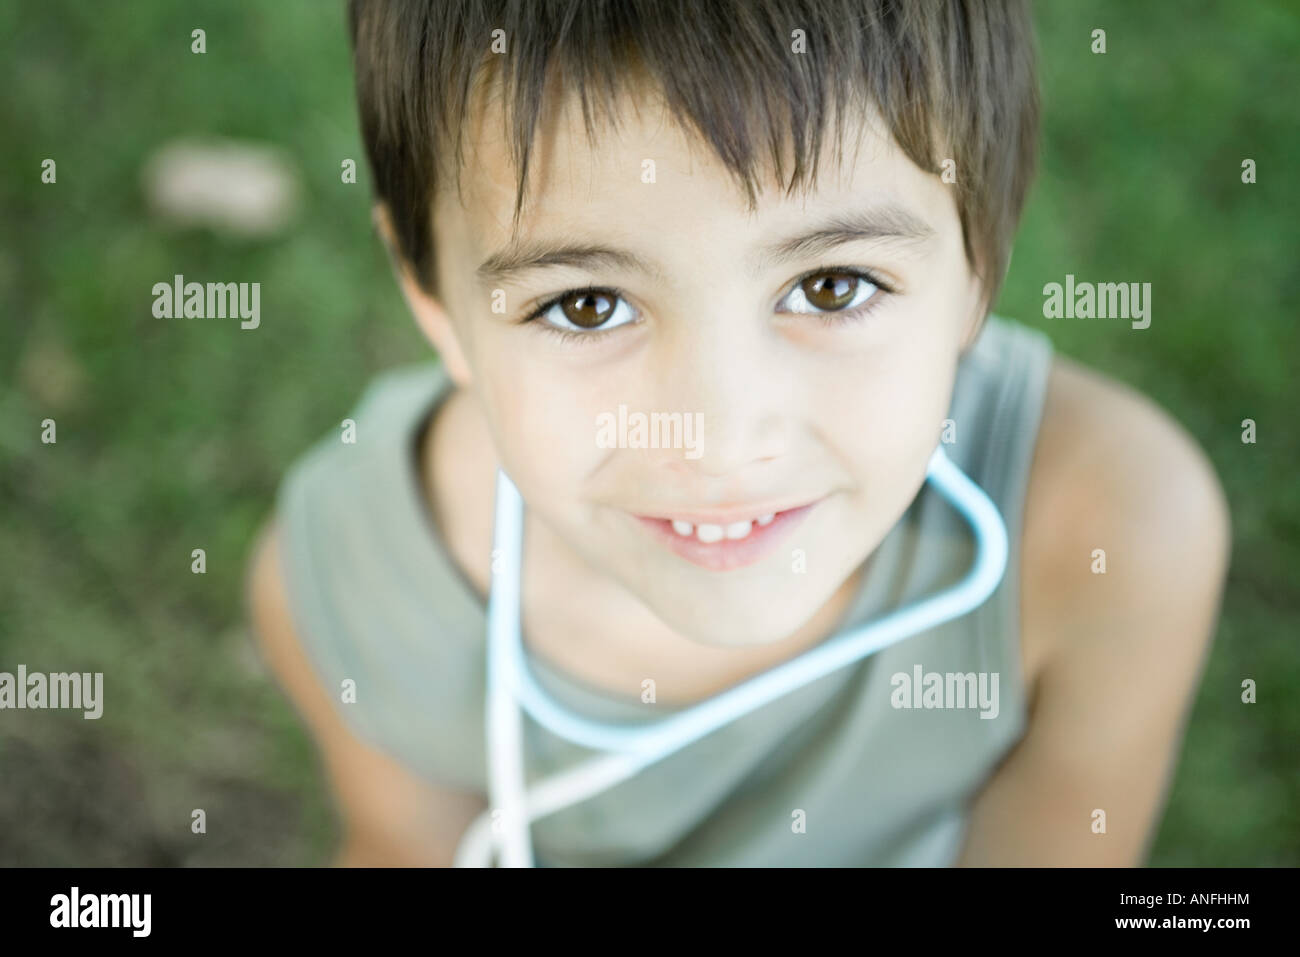 Little boy outdoors, wearing toy stethoscope around neck, high angle view Stock Photo